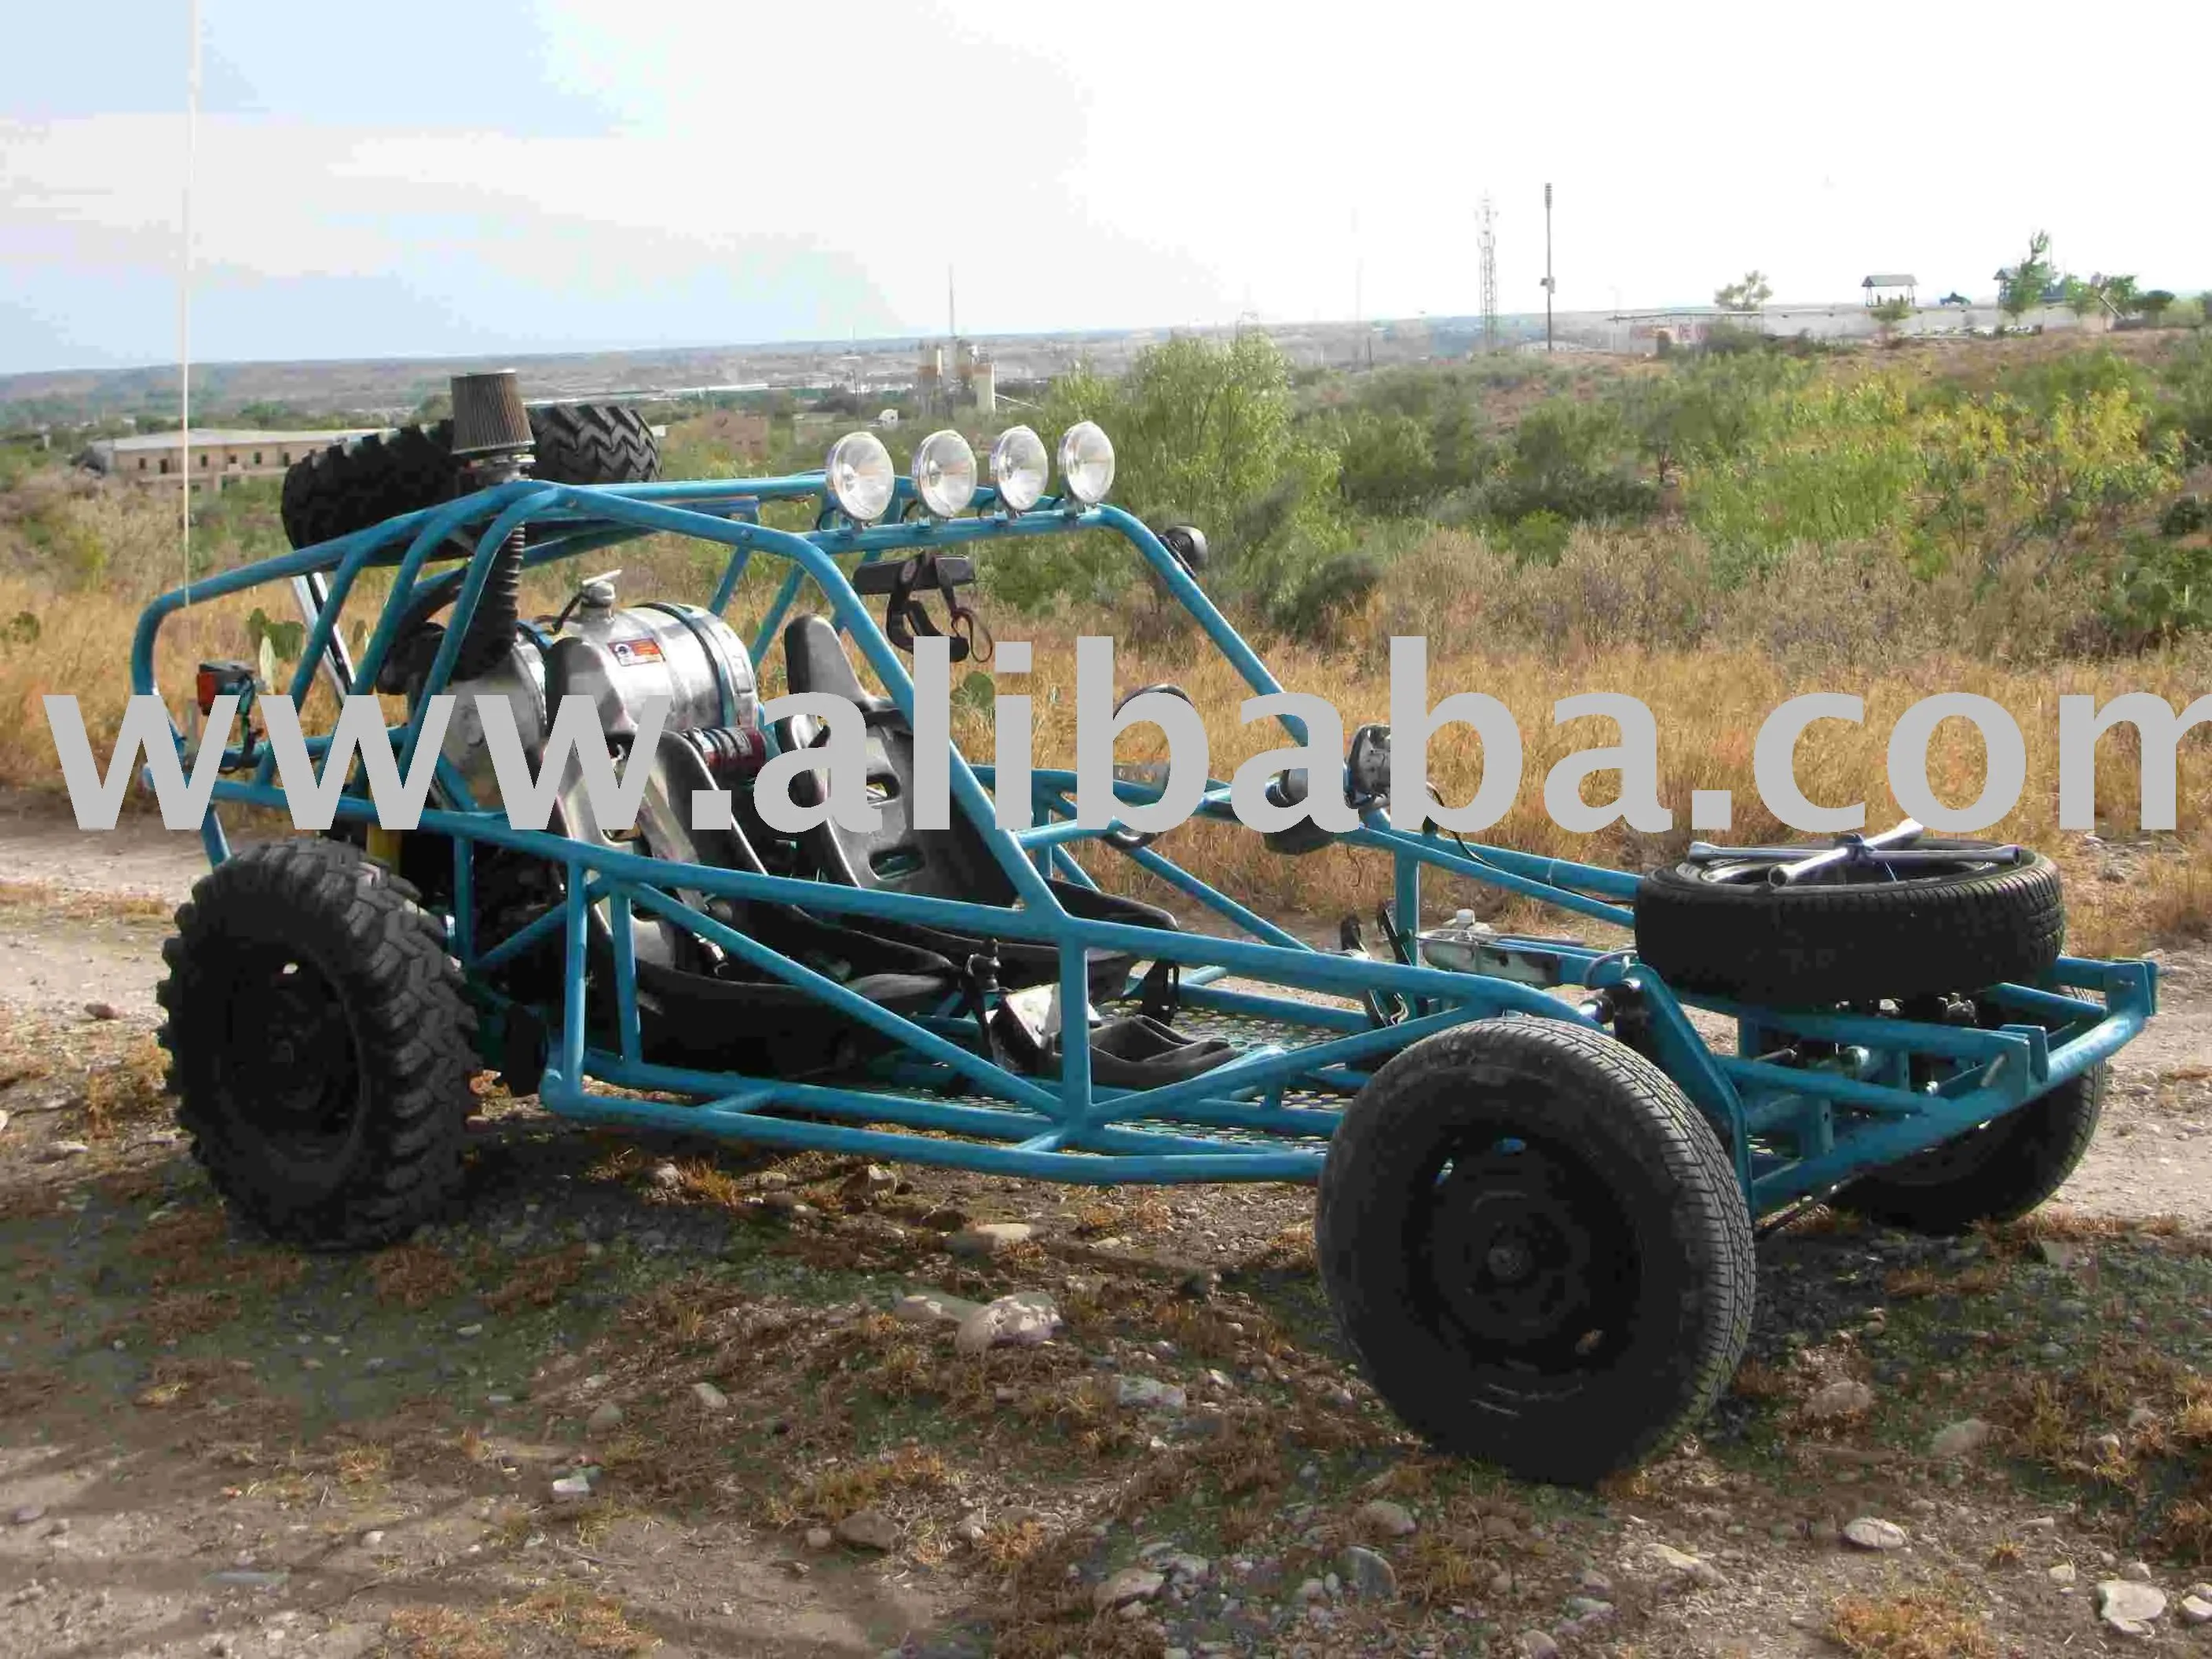 sand rails and dune buggies for sale